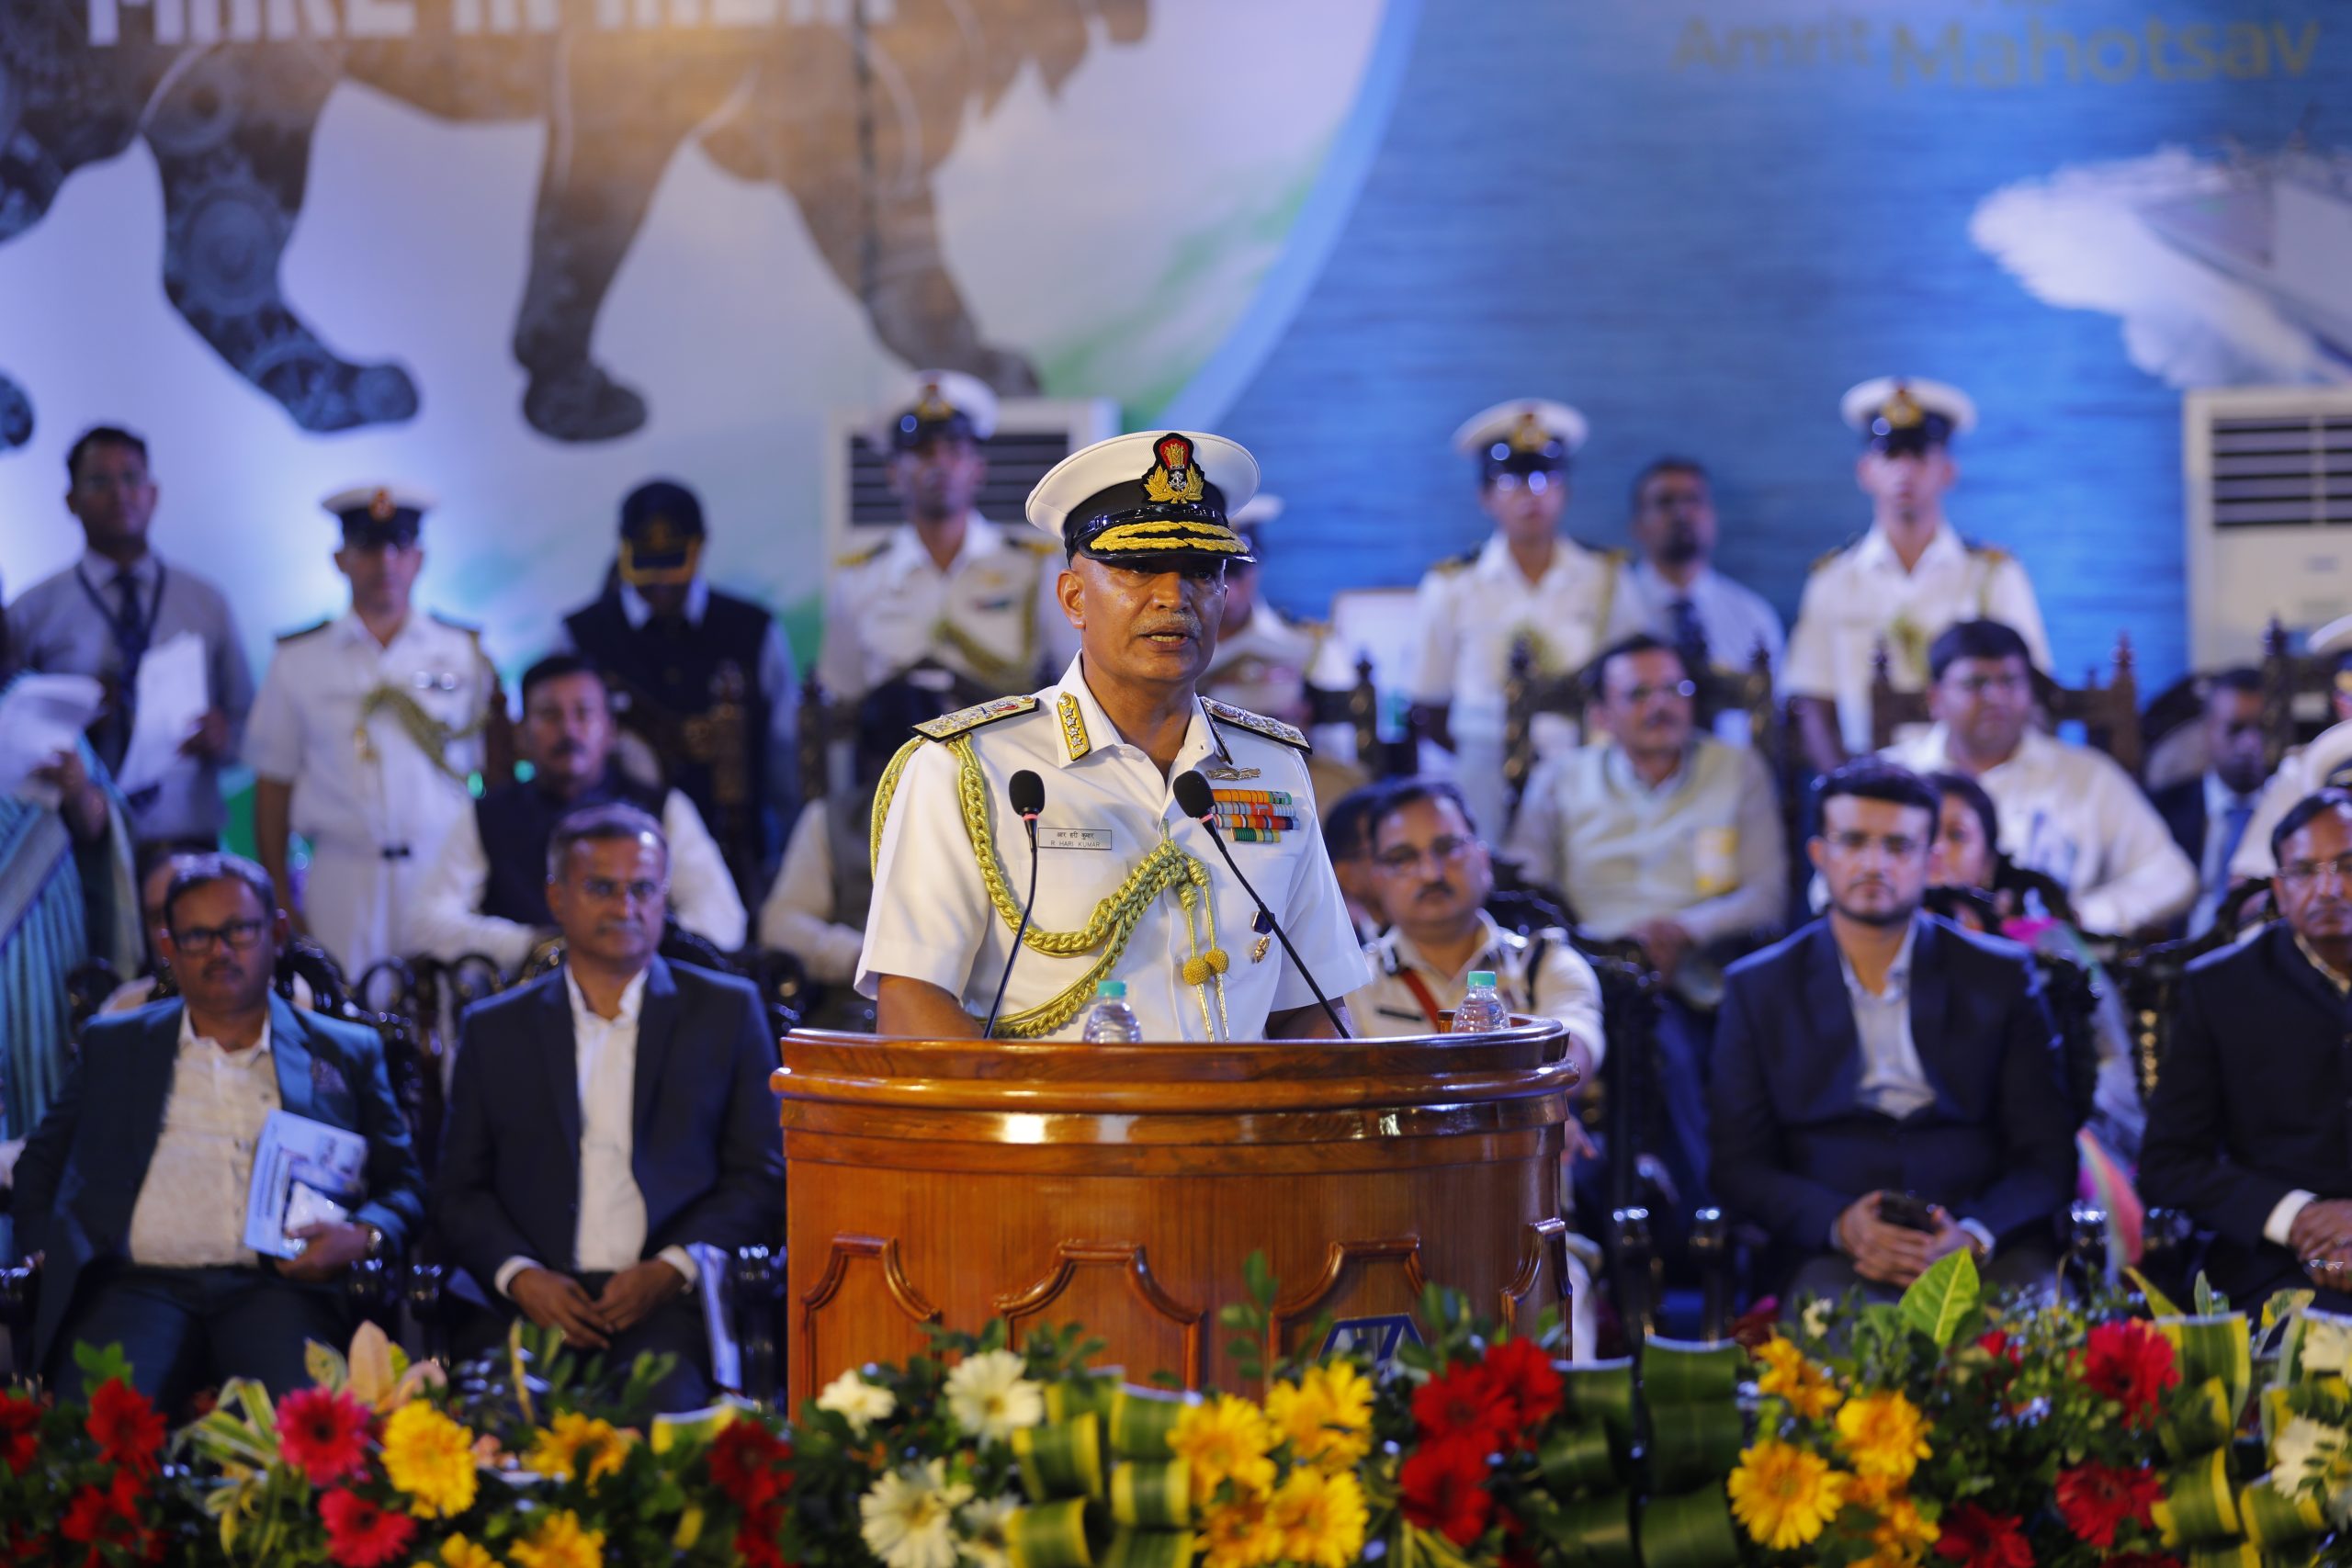 The Hon'ble President of India, Smt Droupadi Murmu, Shri CV Ananda Bose, Hon’ble Governor of West Bengal, Ms Mamata Banerjee Chief Minister of West Bengal, Shri Ajay Bhatt Raksha Rajya Mantri, Admiral R Hari Kumar, Chief of the Naval Staff, other senior officers from the Indian Navy and MoD, were amongst the several dignitaries who attended the launch ceremony.